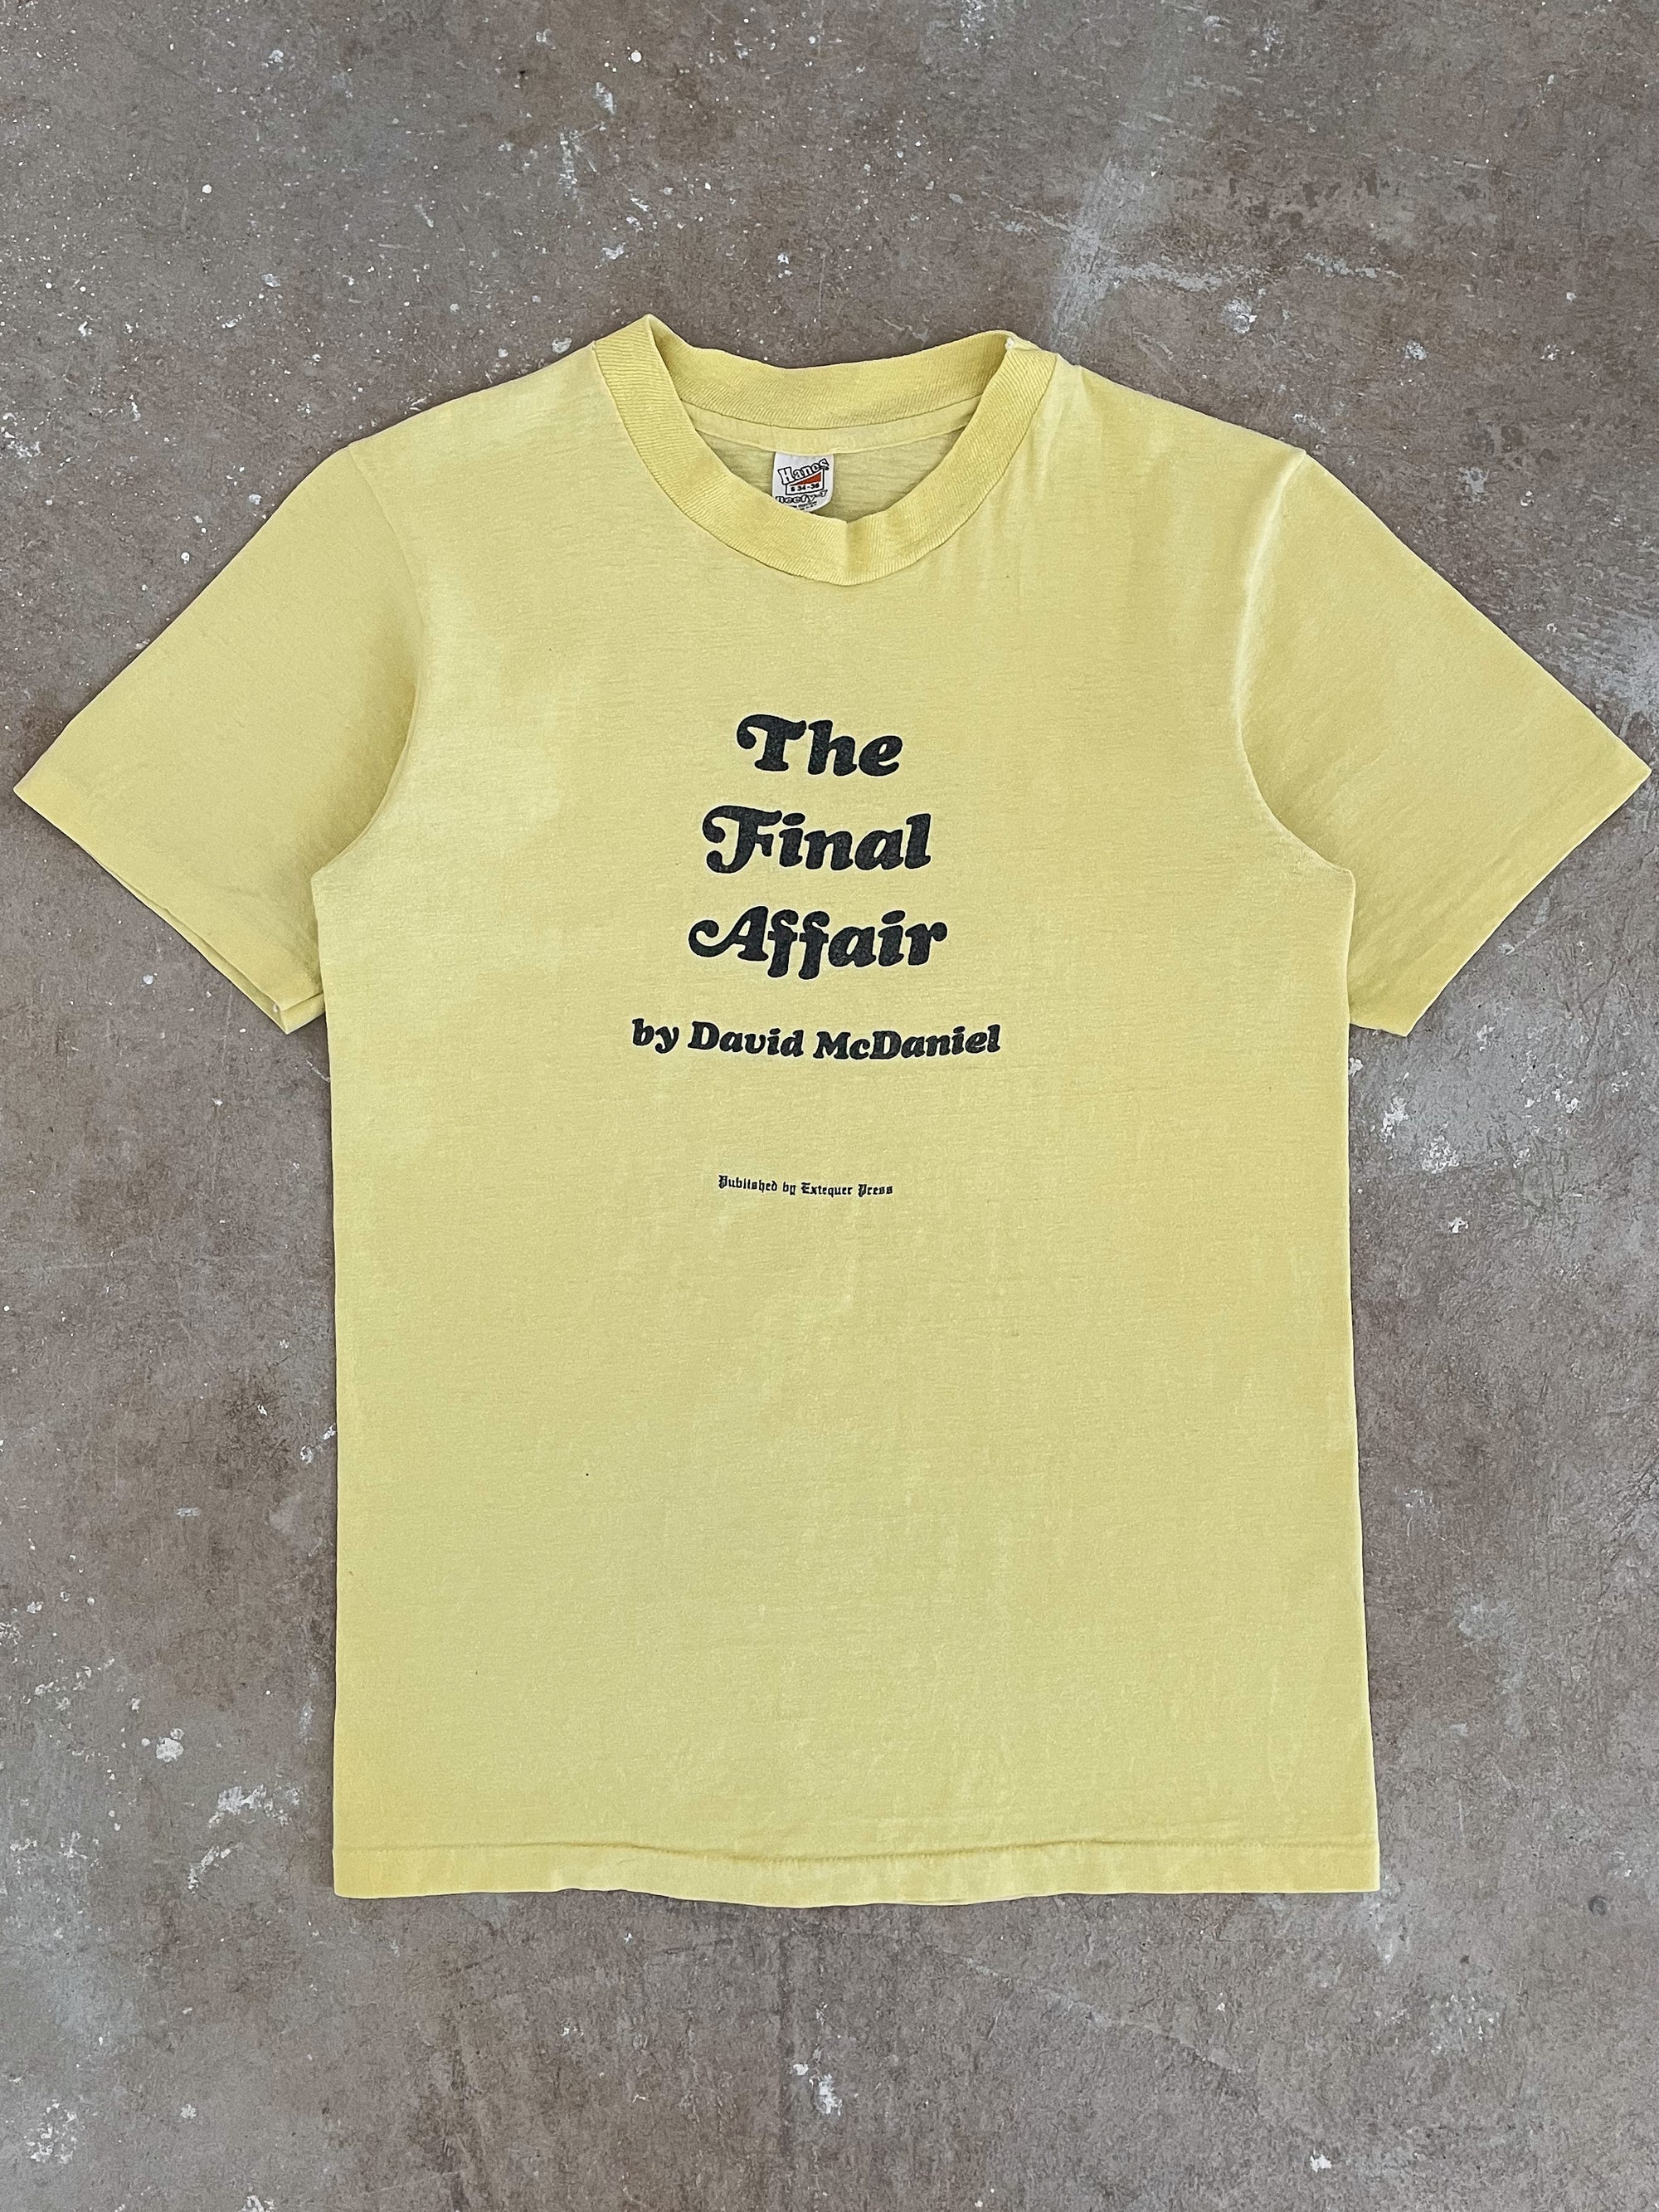 1970s/80s “The Final Affair” Single Stitched Tee (XS)